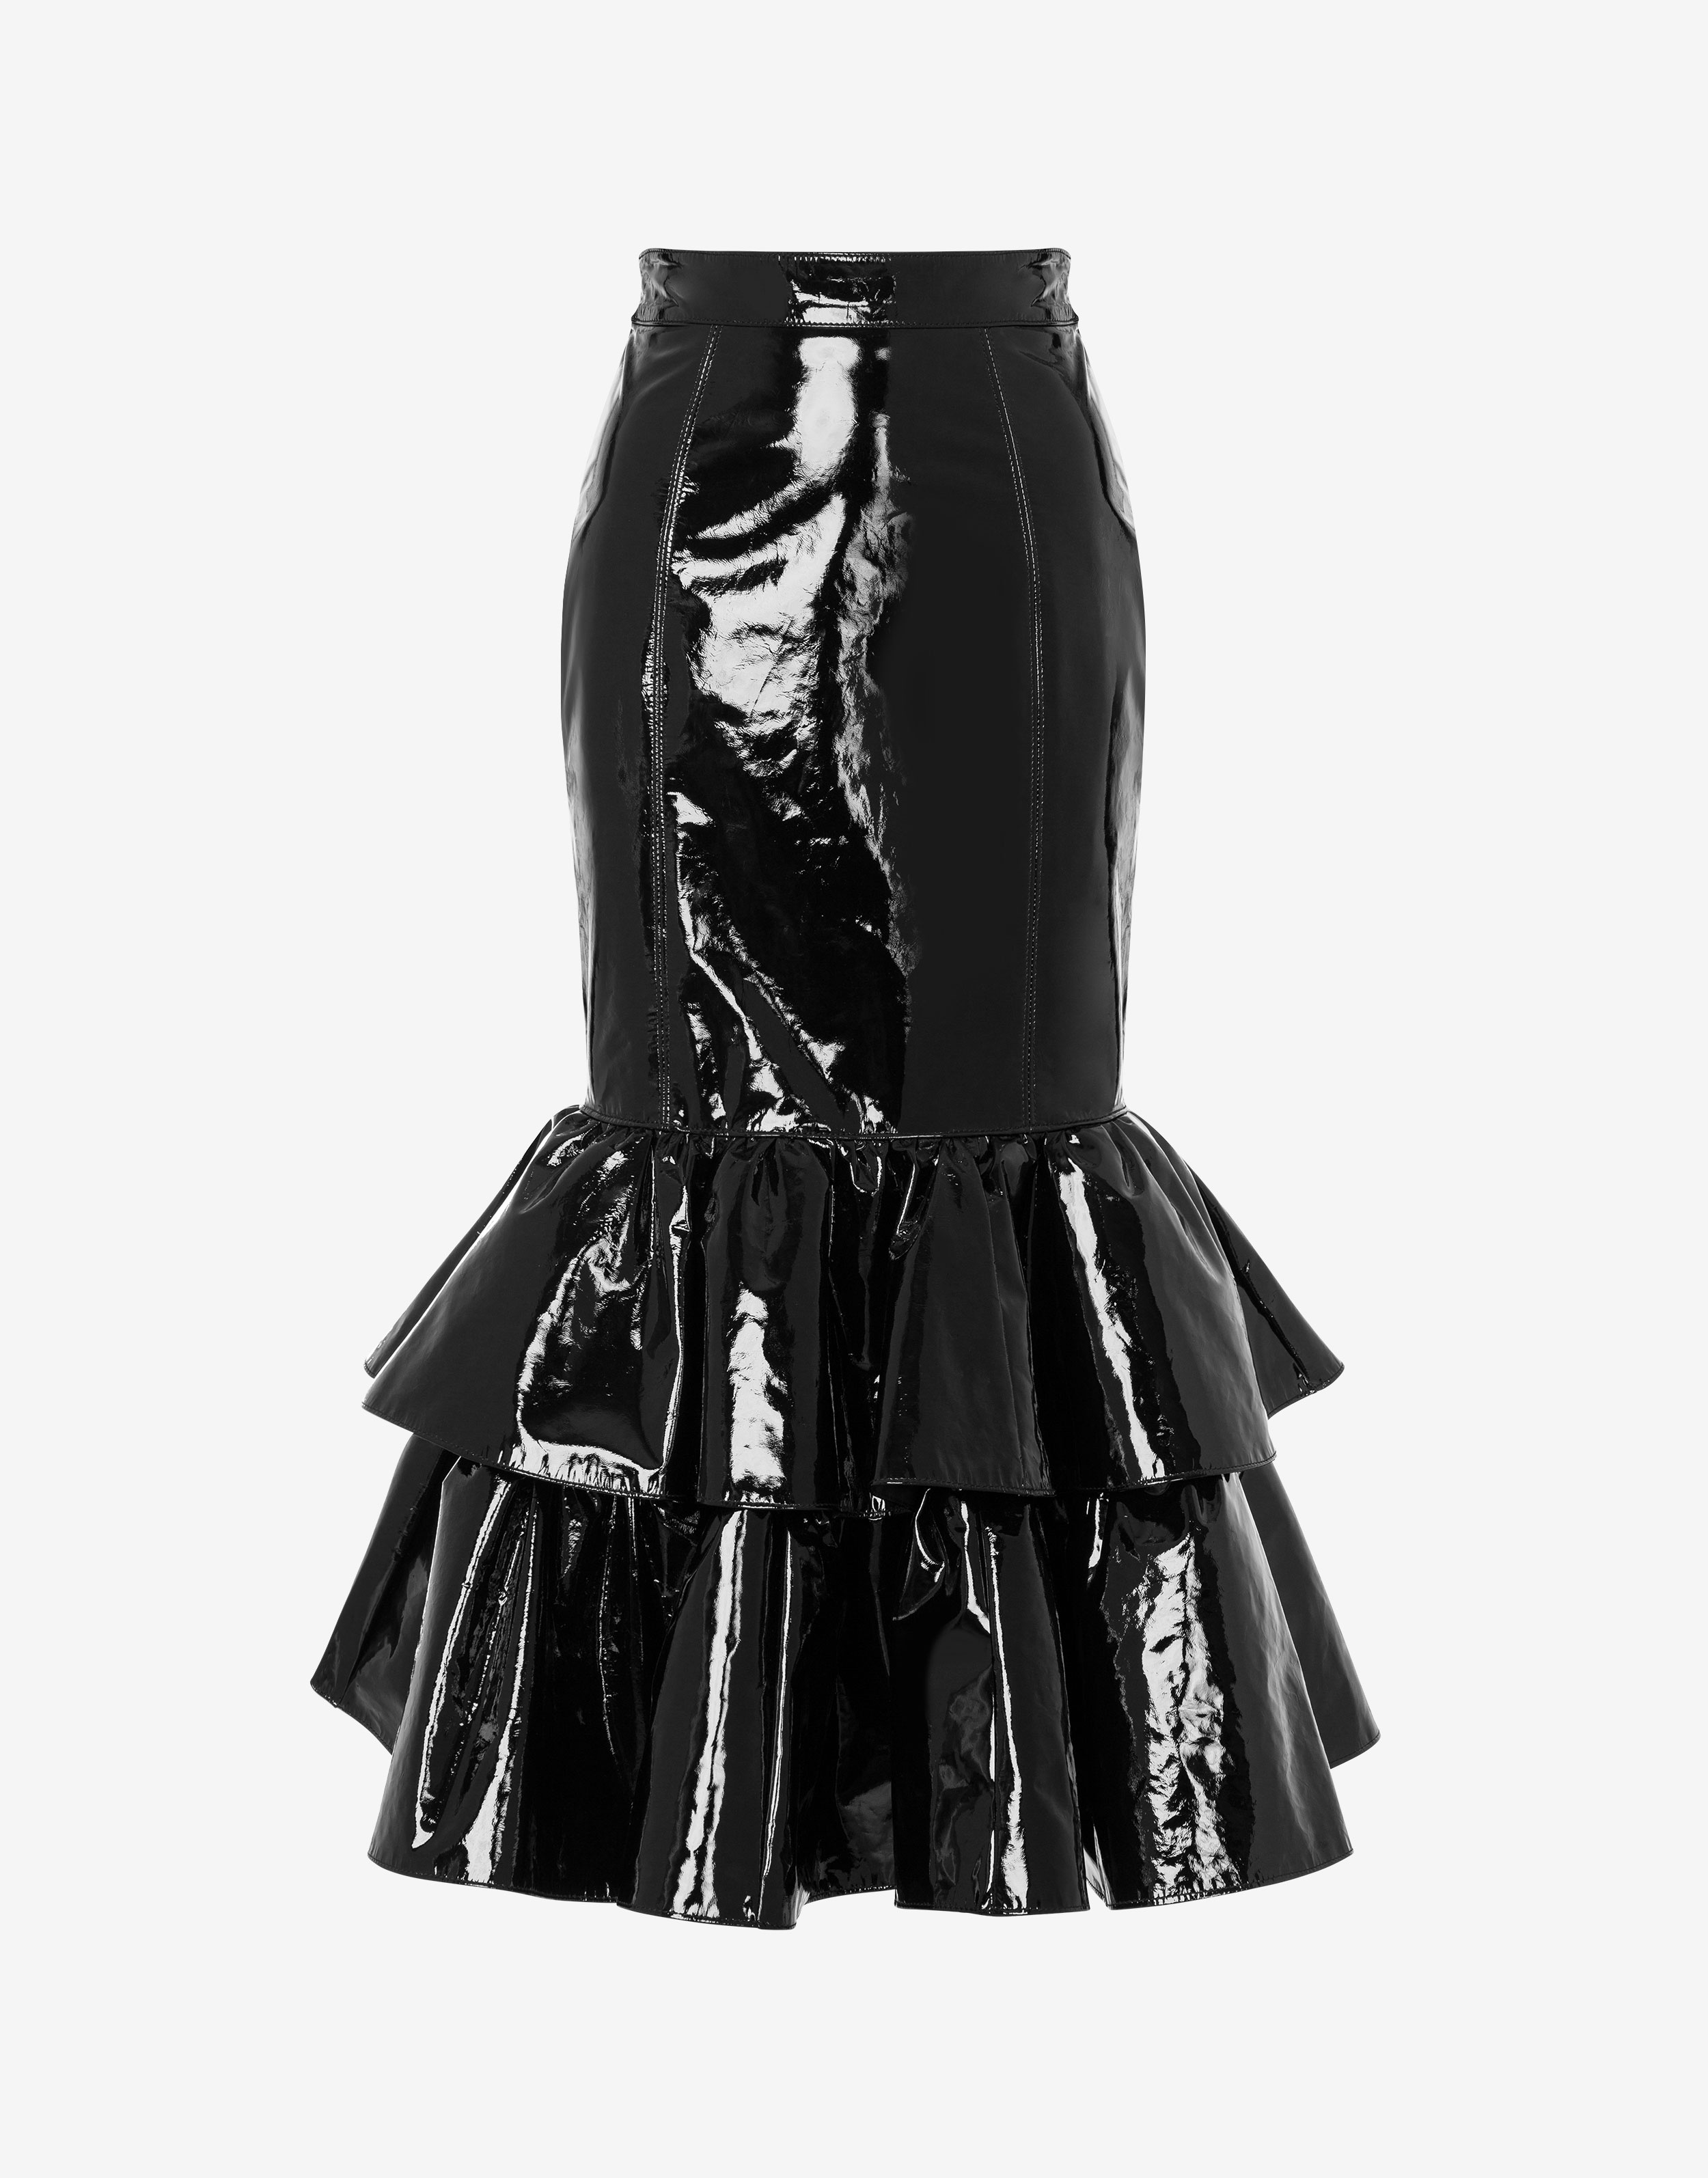 PATENT LEATHER SKIRT WITH RUFFLES - 1